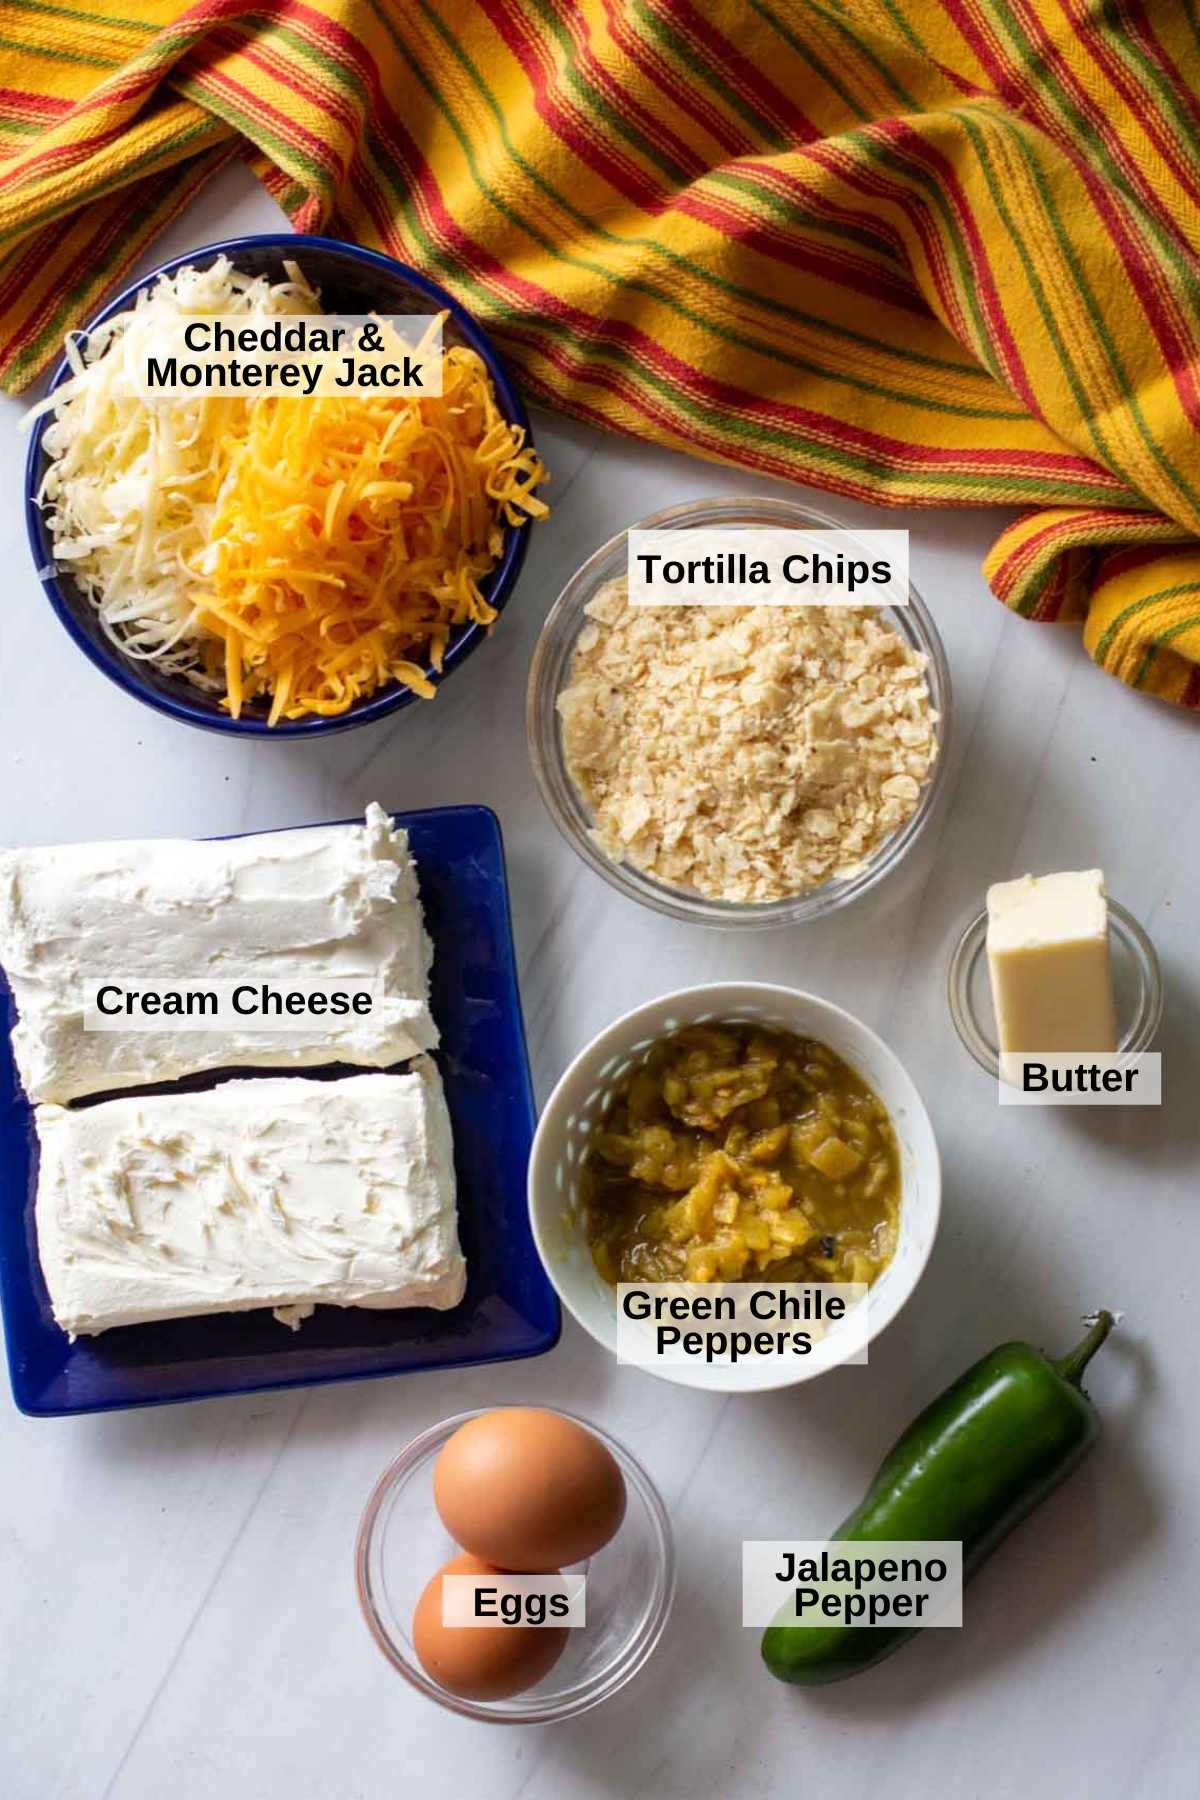 Ingredients to make Mexican Cheesecake.